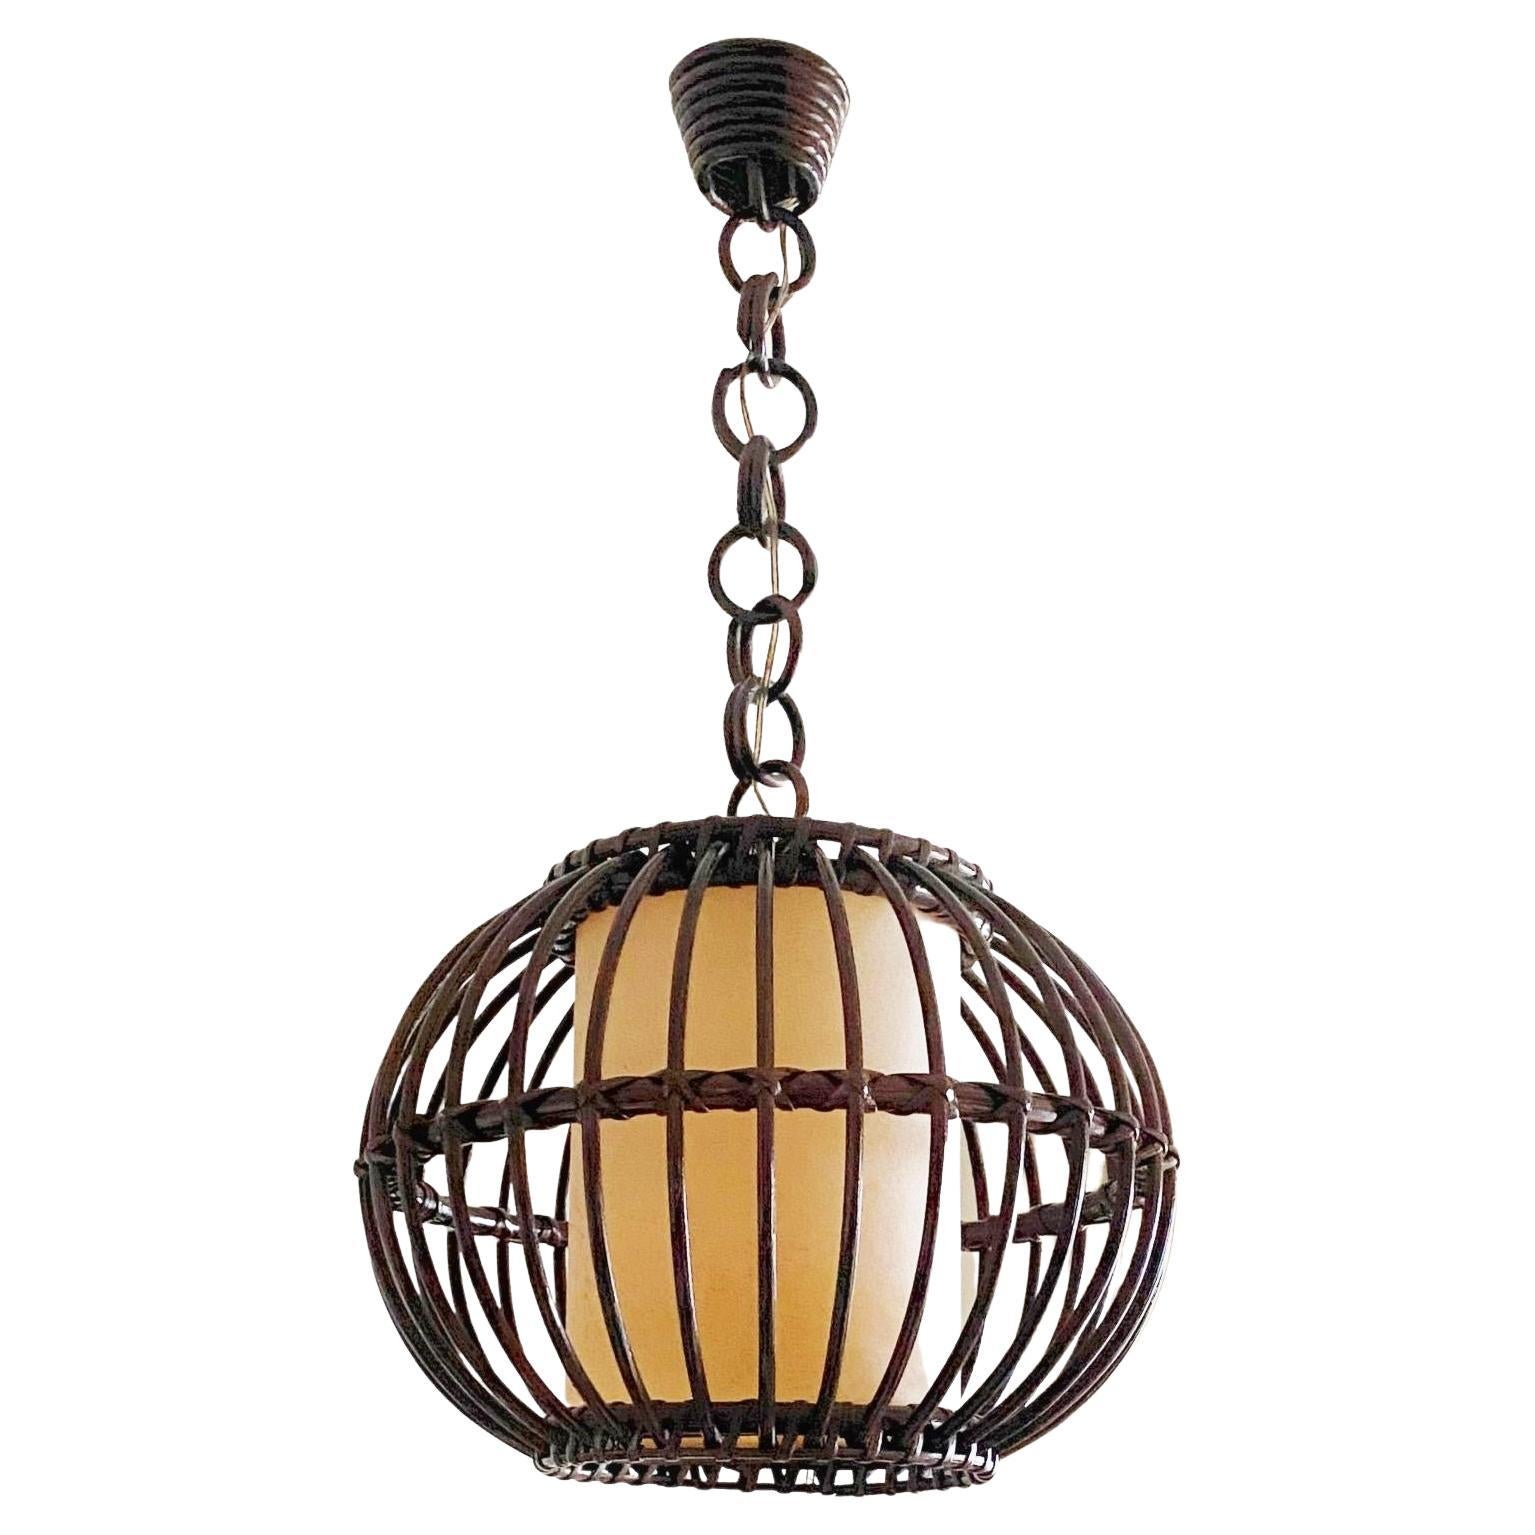 Louis Sognot Bamboo Rattan Pendant Lantern with Perchment Shade, France, 1950s